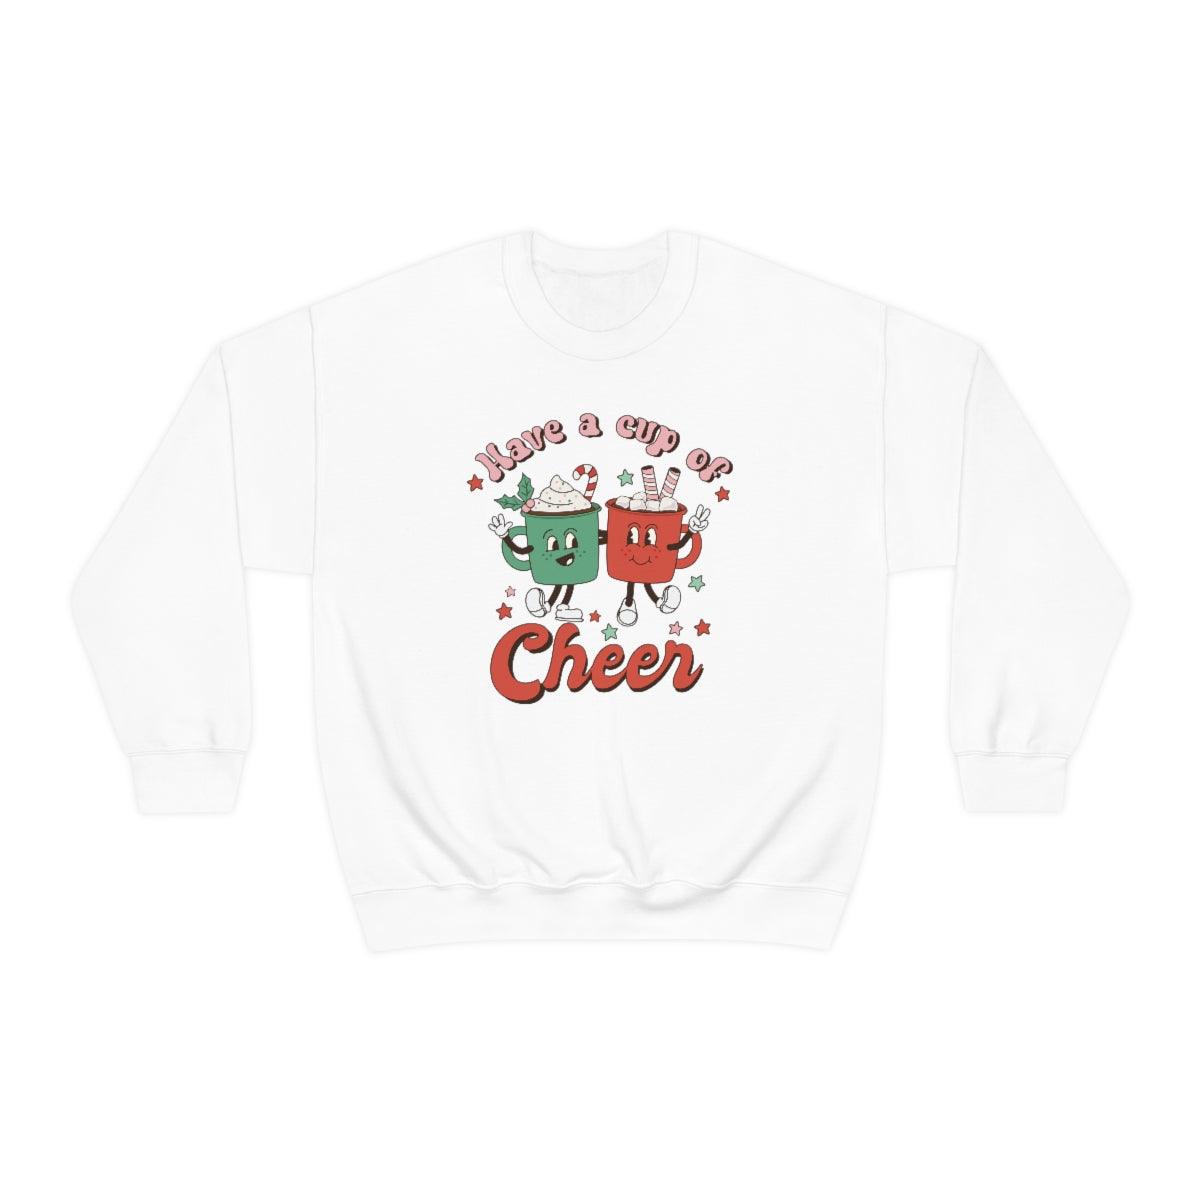 Retro Have a Cup of Christmas Cheer Christmas Crewneck Sweater